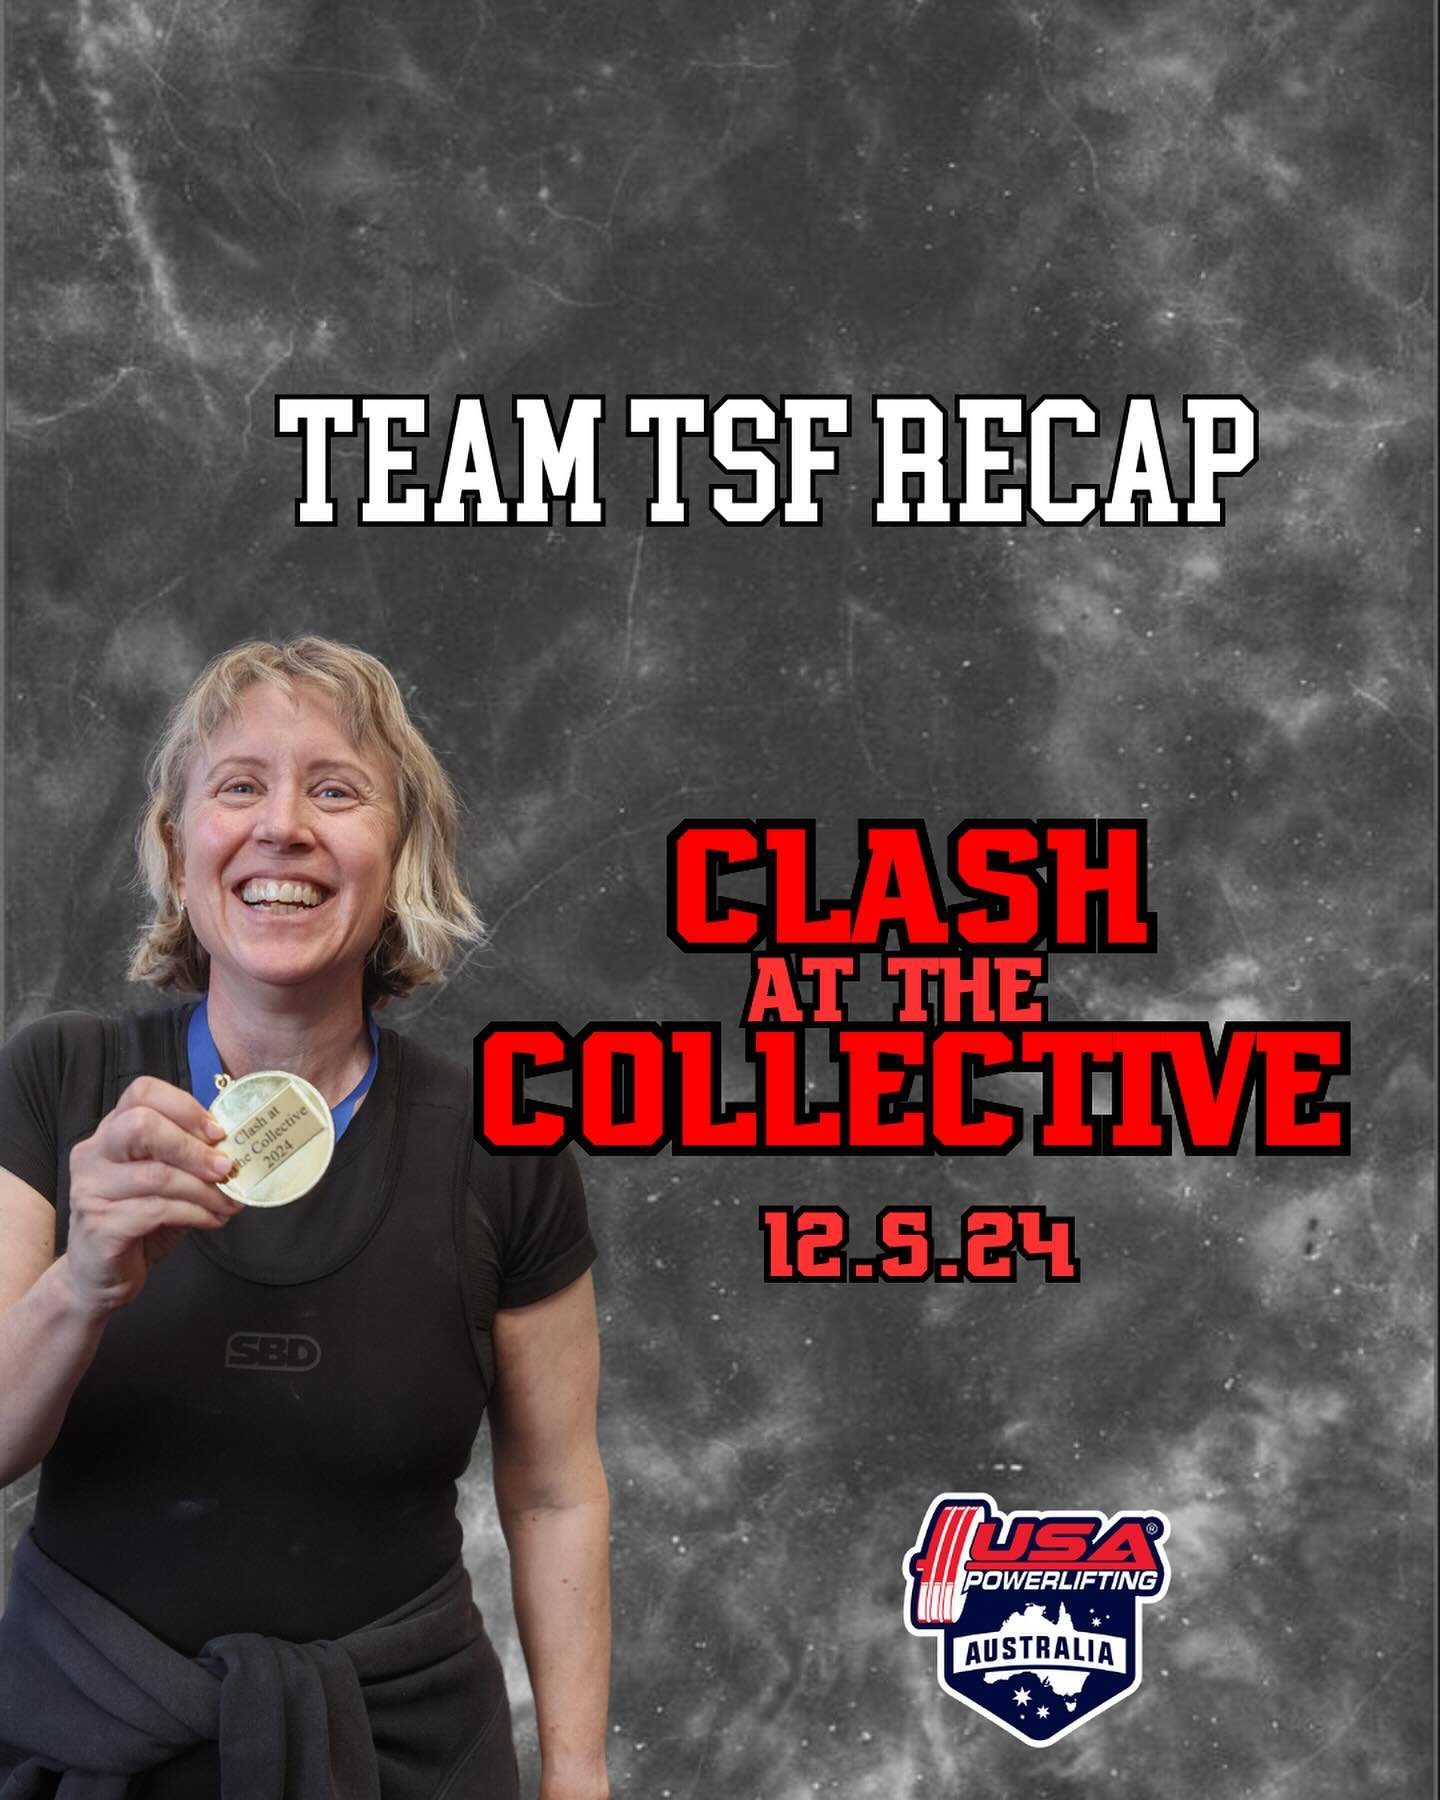 We sent a team of SIX to the inaugural Clash at the Collective @sr_strength_collective last weekend, and it was a great showing by all!

Coaches @joshualuu and @billieasprey took care of our crew with a collective 48/54 successful attempts 💪 

@tali